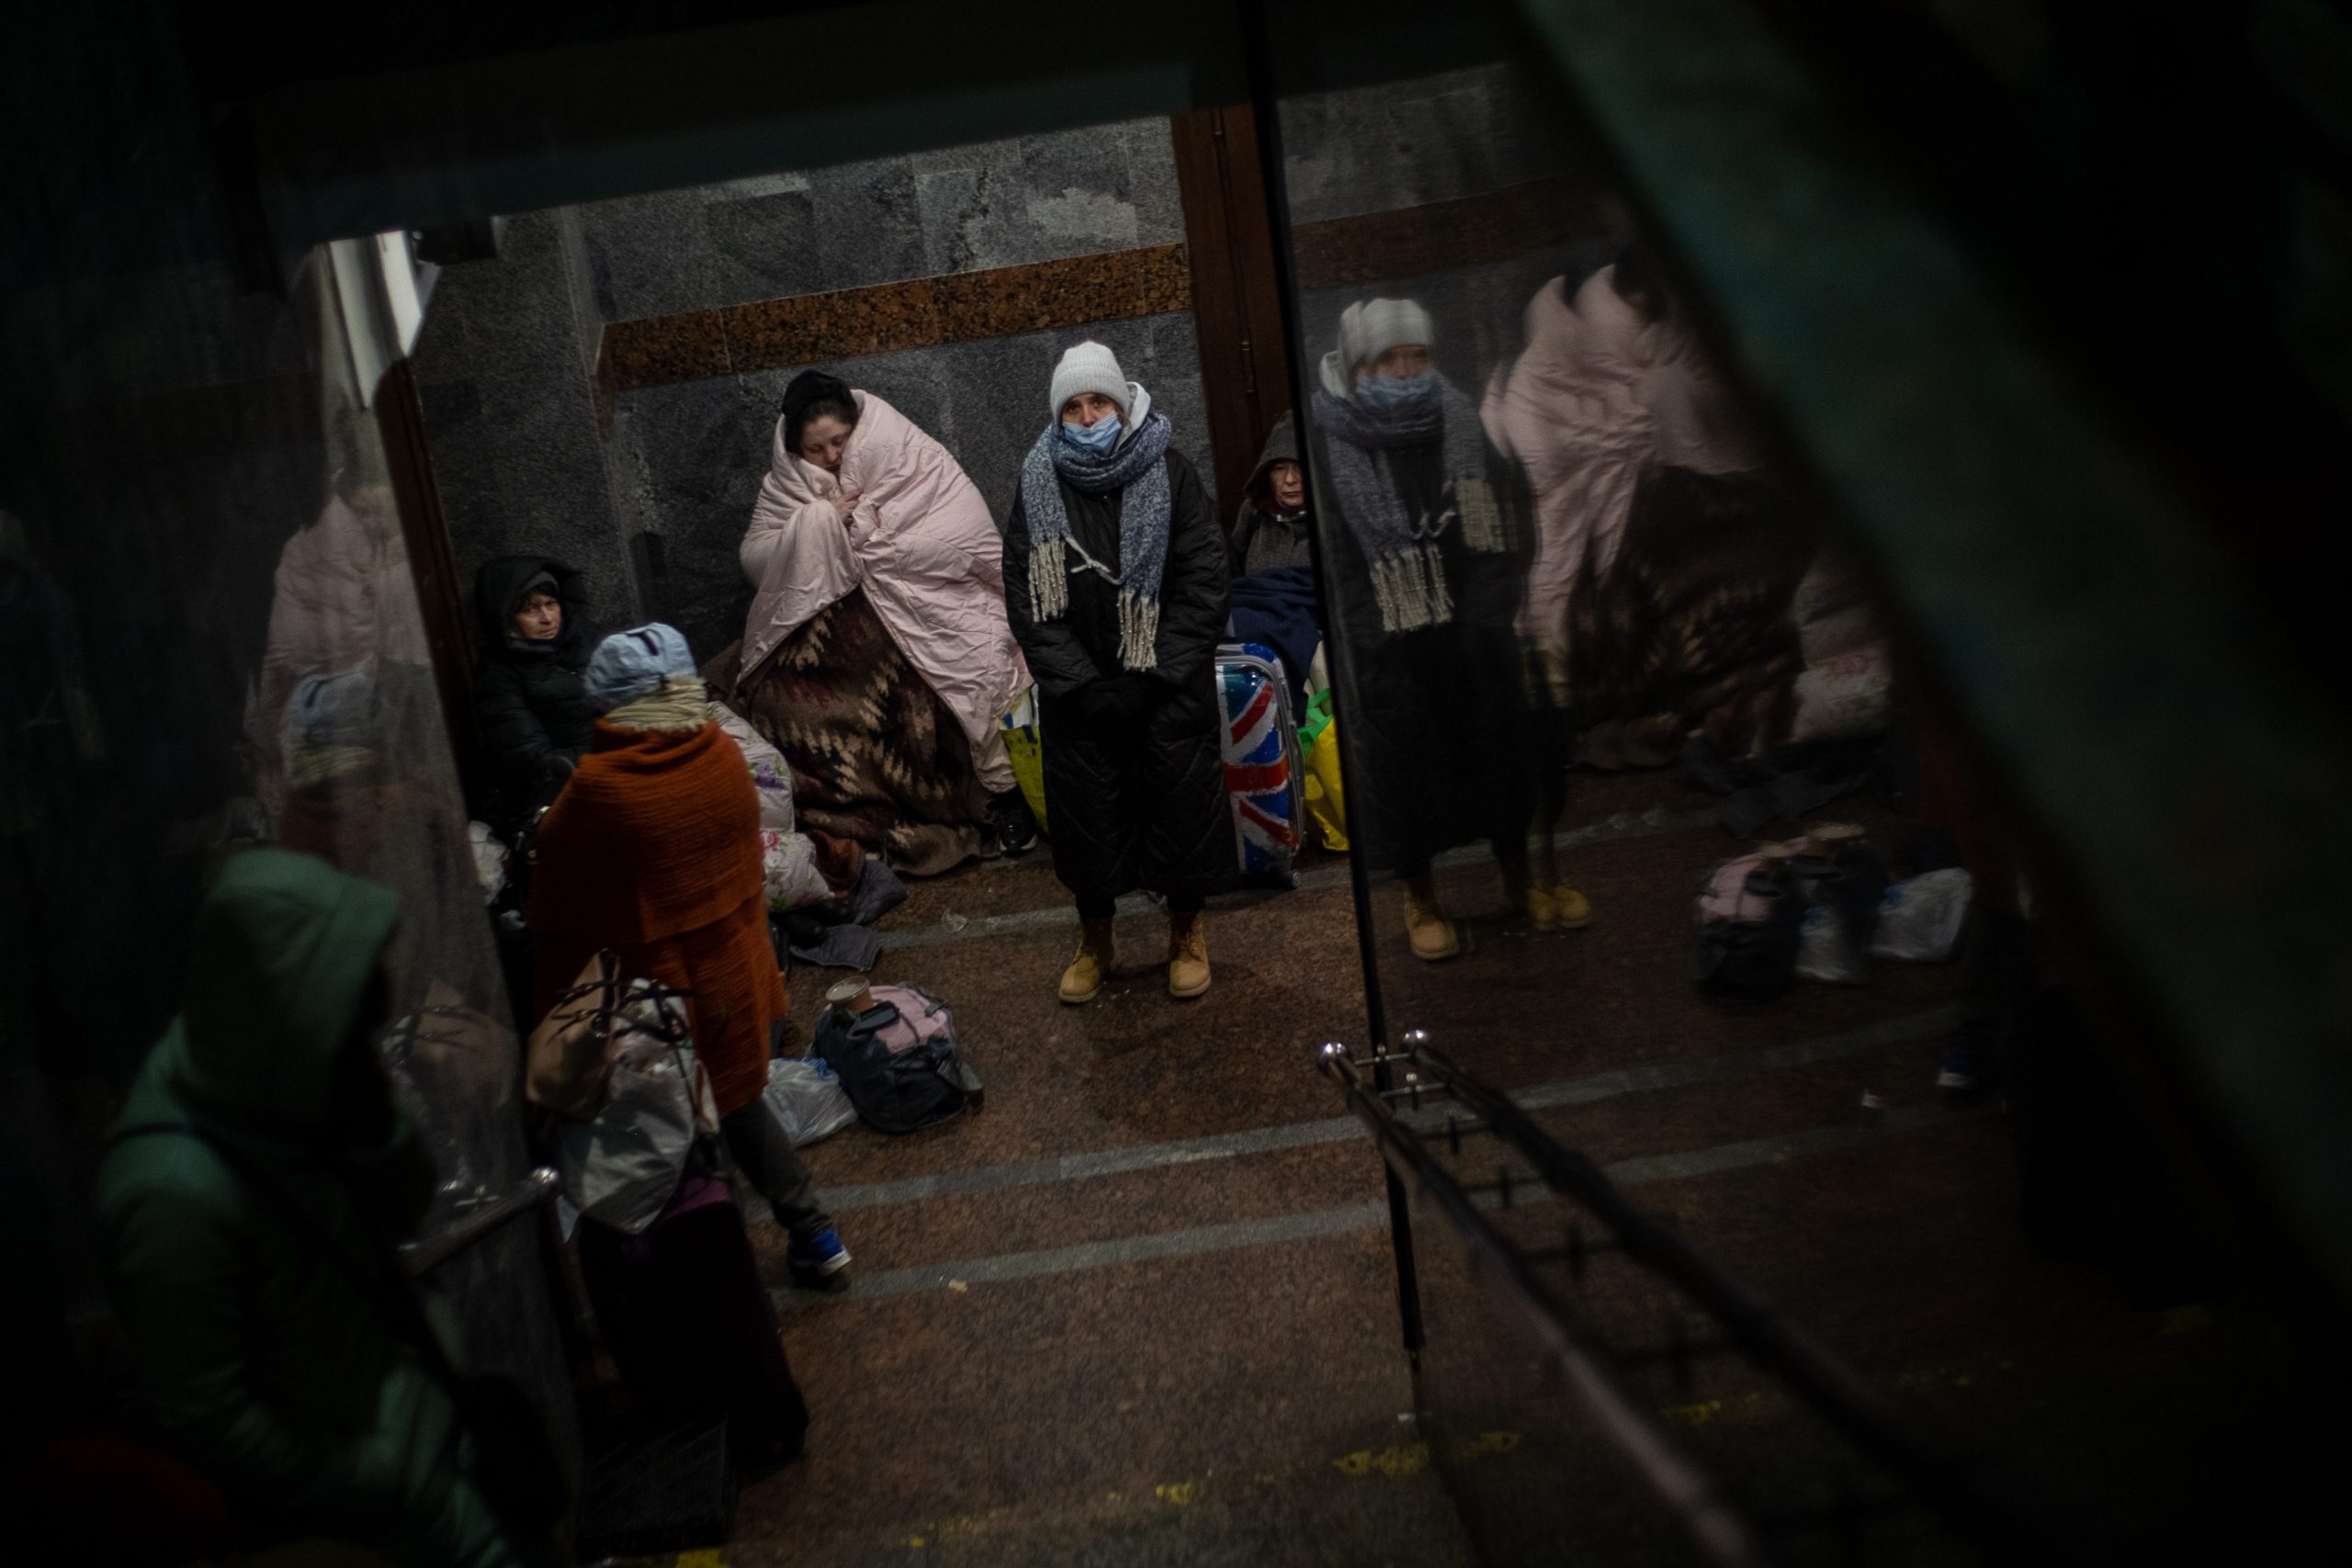 People are seen huddled for warmth at the bottom of a staircase at a train station.